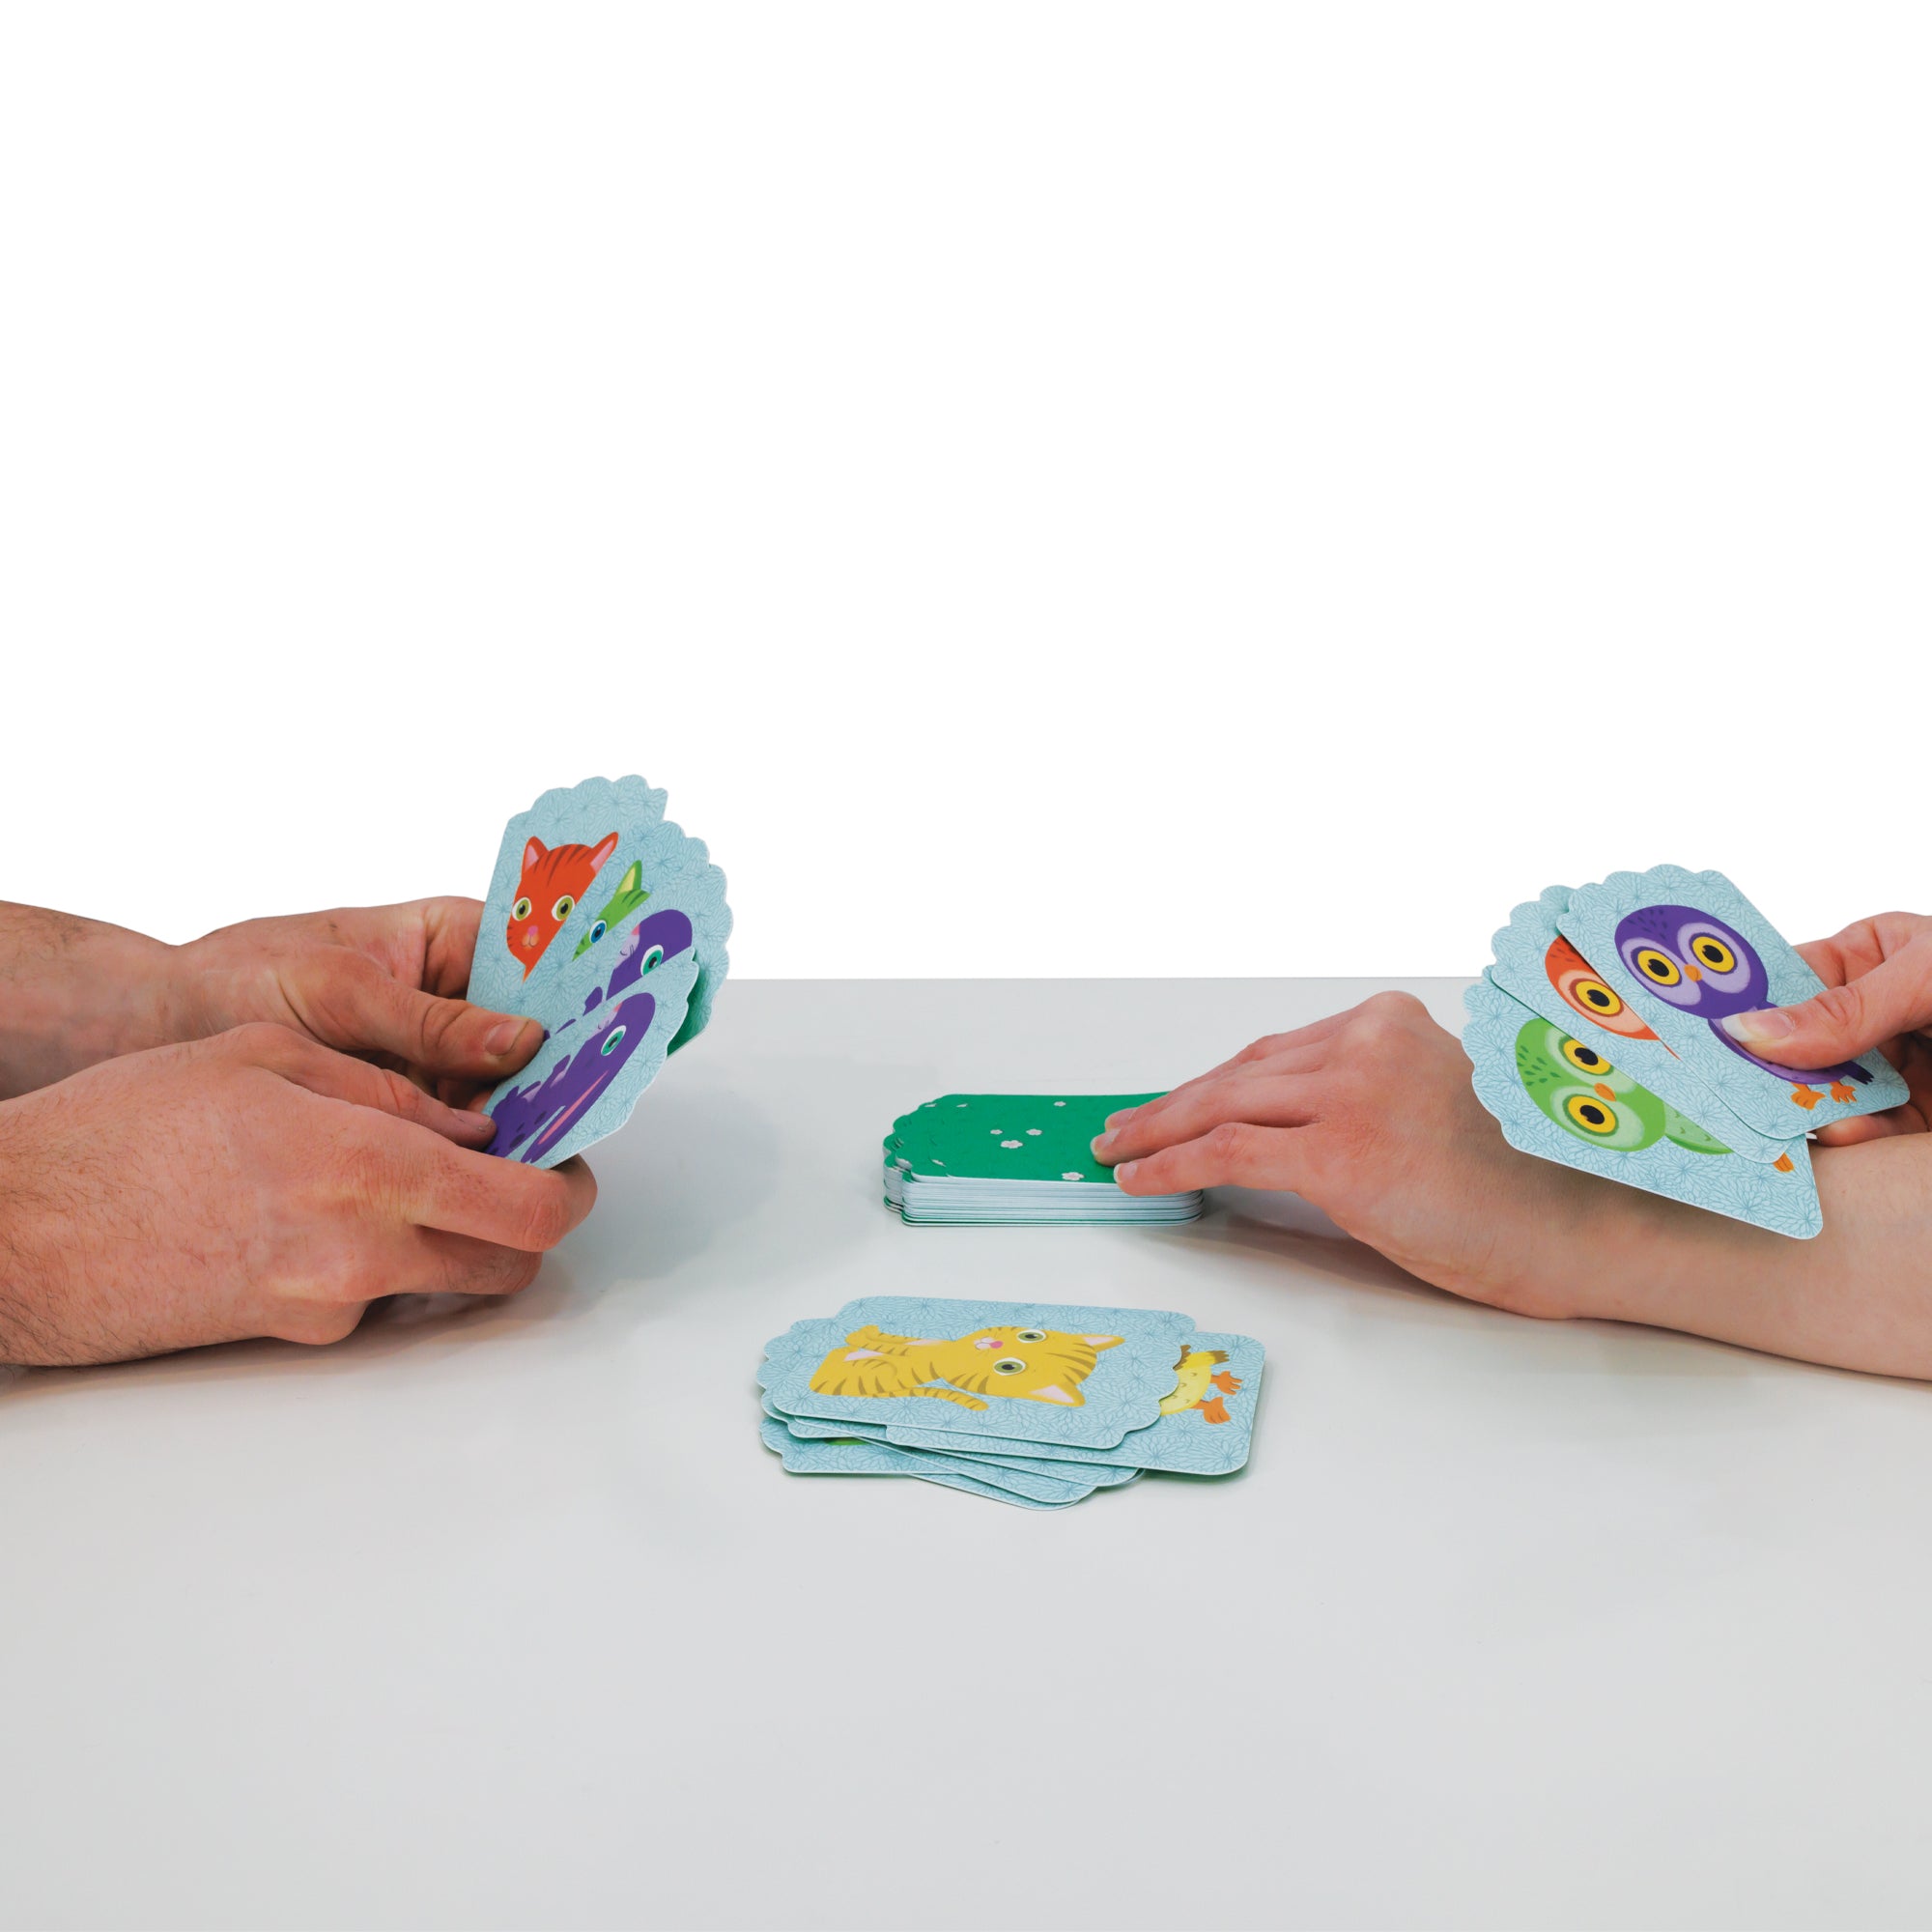 2 people’s hands on either side of the table playing the Djeco Little Match game. The left player is holding 4 cards. The right player is holding 3 cards, and is drawing another card with their left hand. There are 2 piles of cards in the middle; one stack face down, and one stack face up. The cards have different colored animals on each.